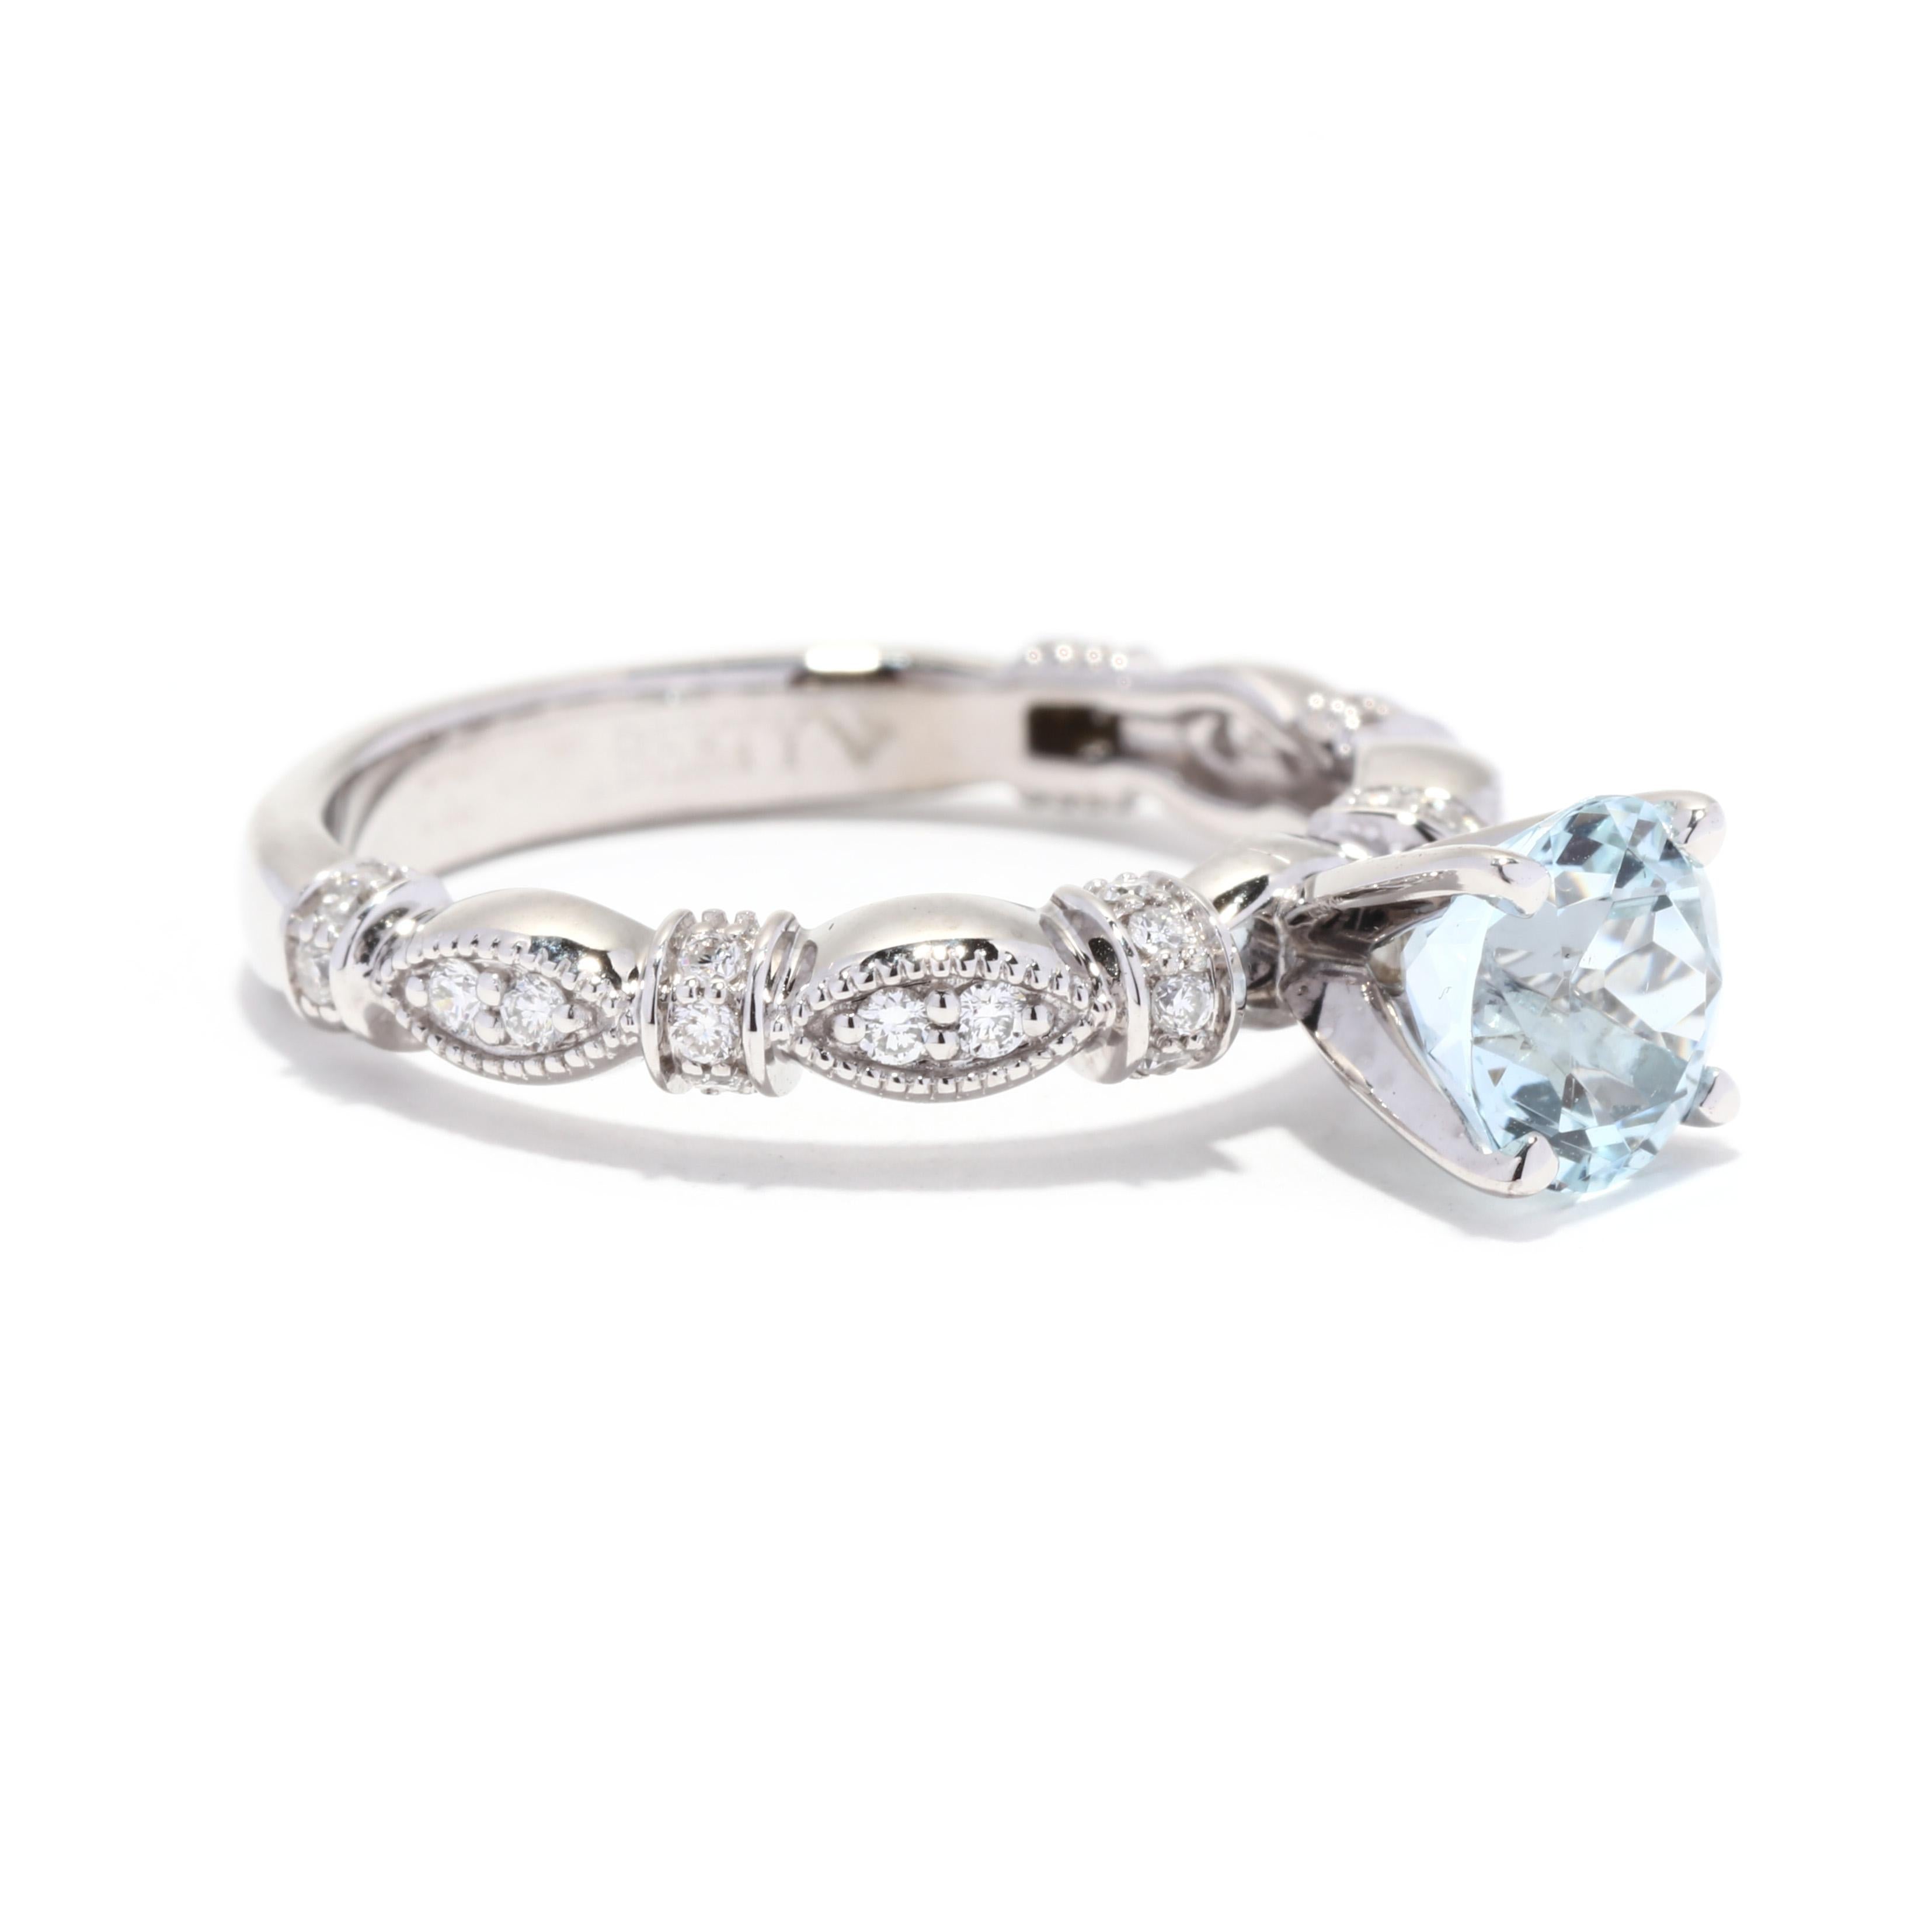 A 14 karat white gold aquamarine and diamond engagement ring. This March birthstone ring features a prong set, round brilliant cut diamond weighing approximately 1 carat set on a marquise set station band set with round brilliant cut diamonds